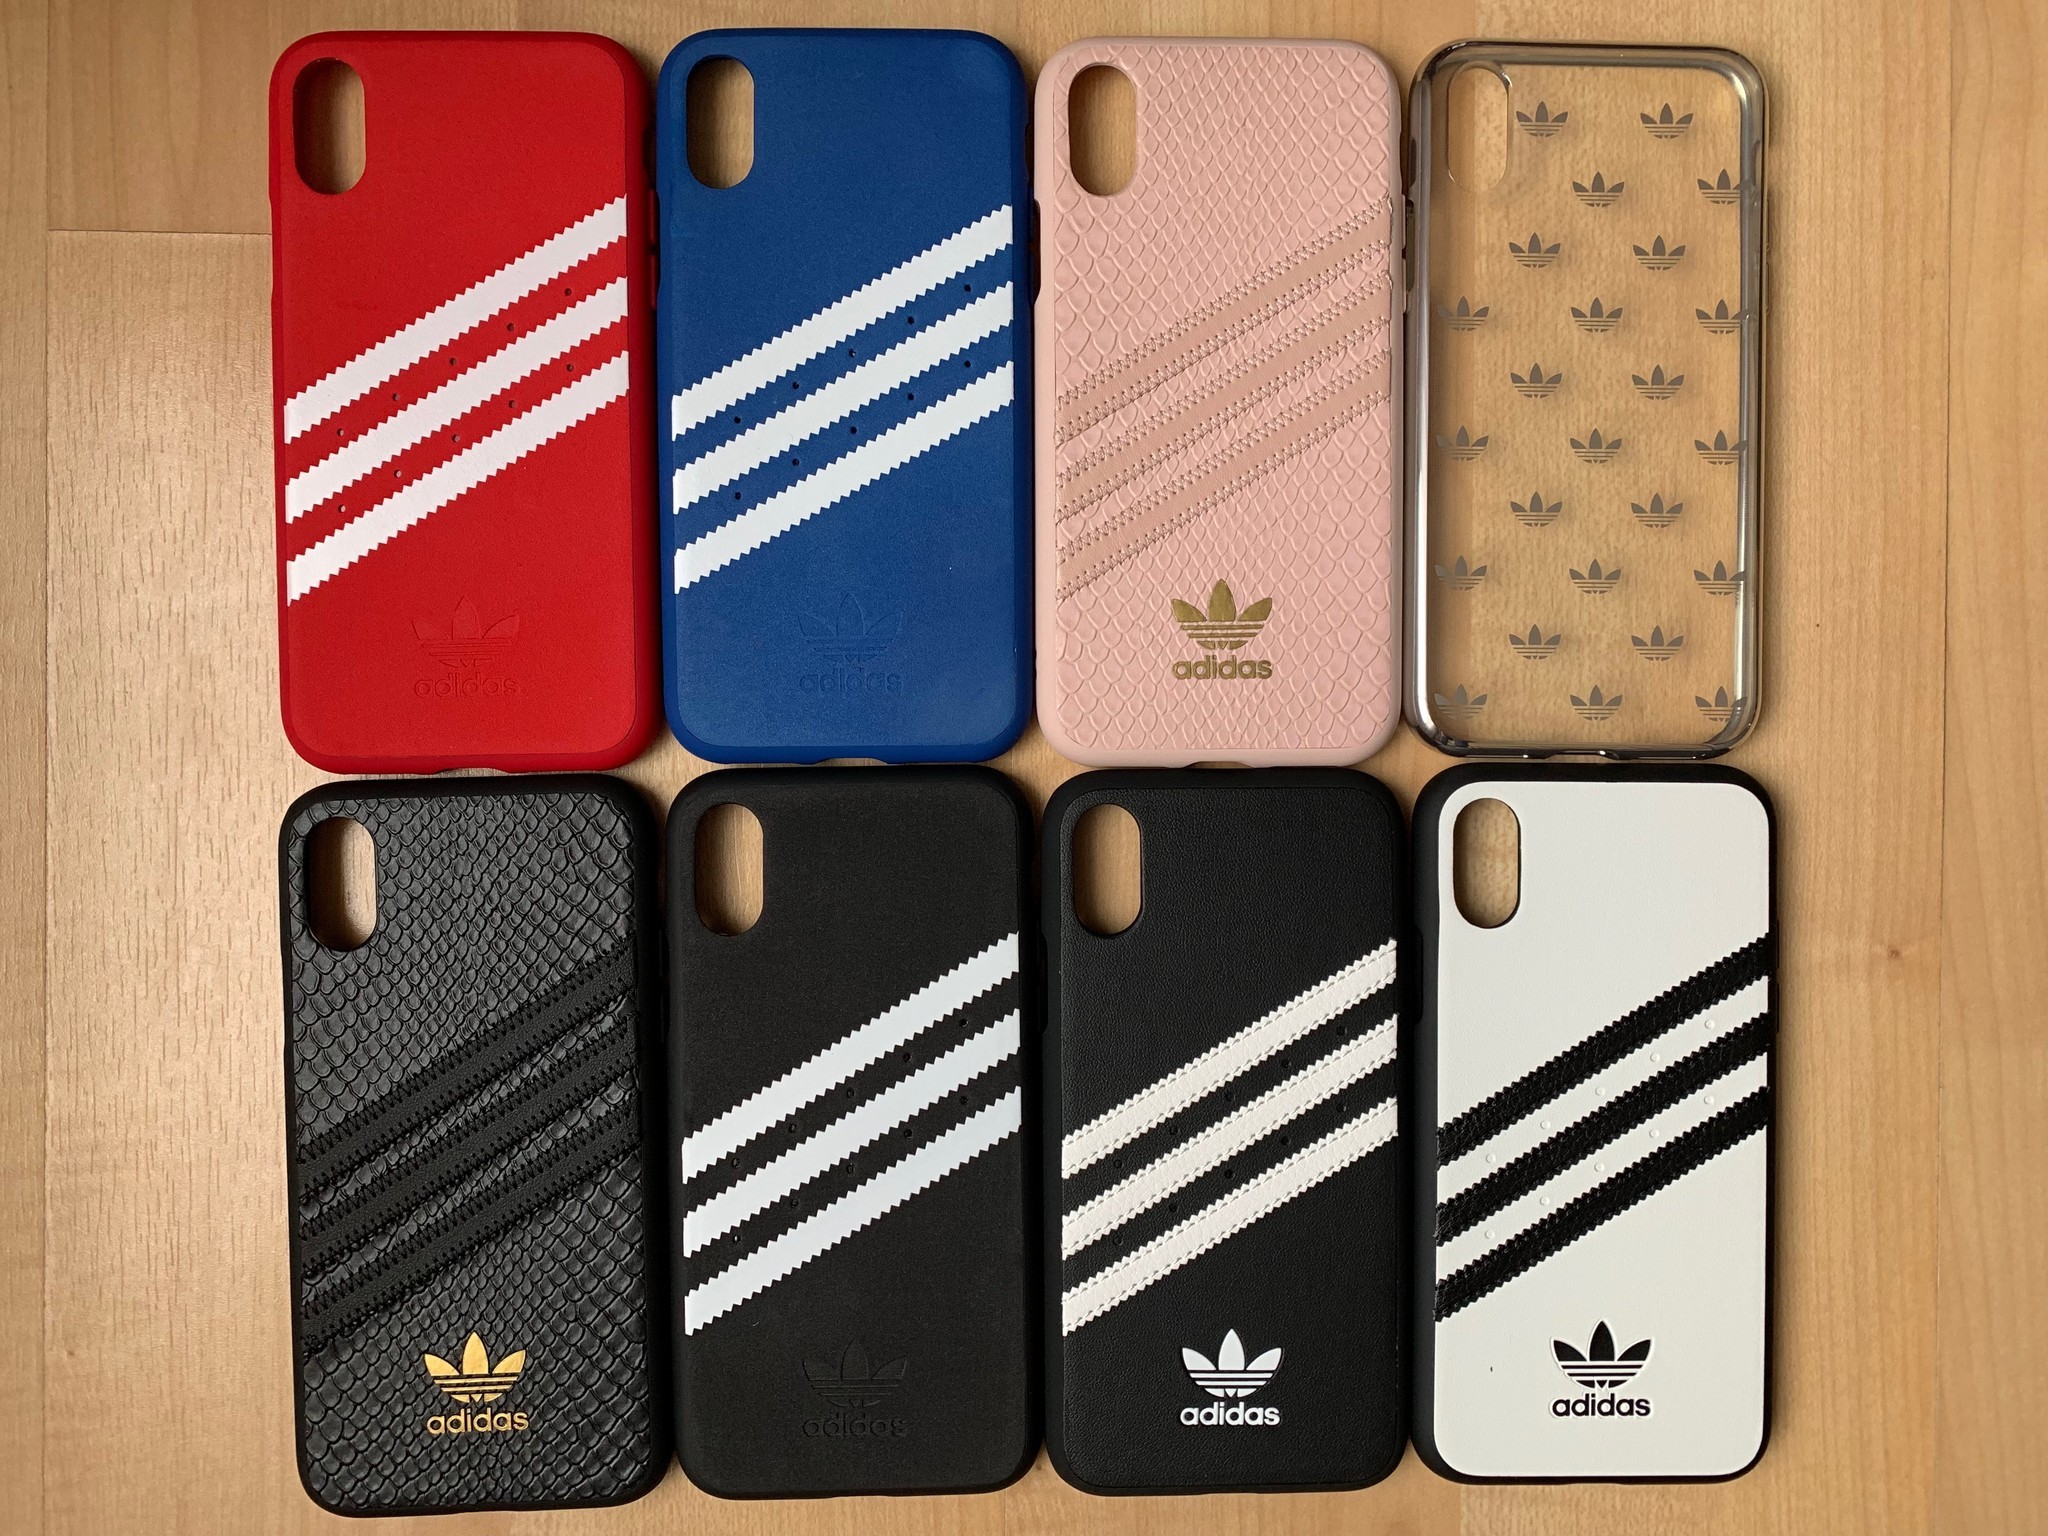 nightmare Peeling Bourgeon Adidas Snap Case for iPhone review: A must for adidas fans | iMore